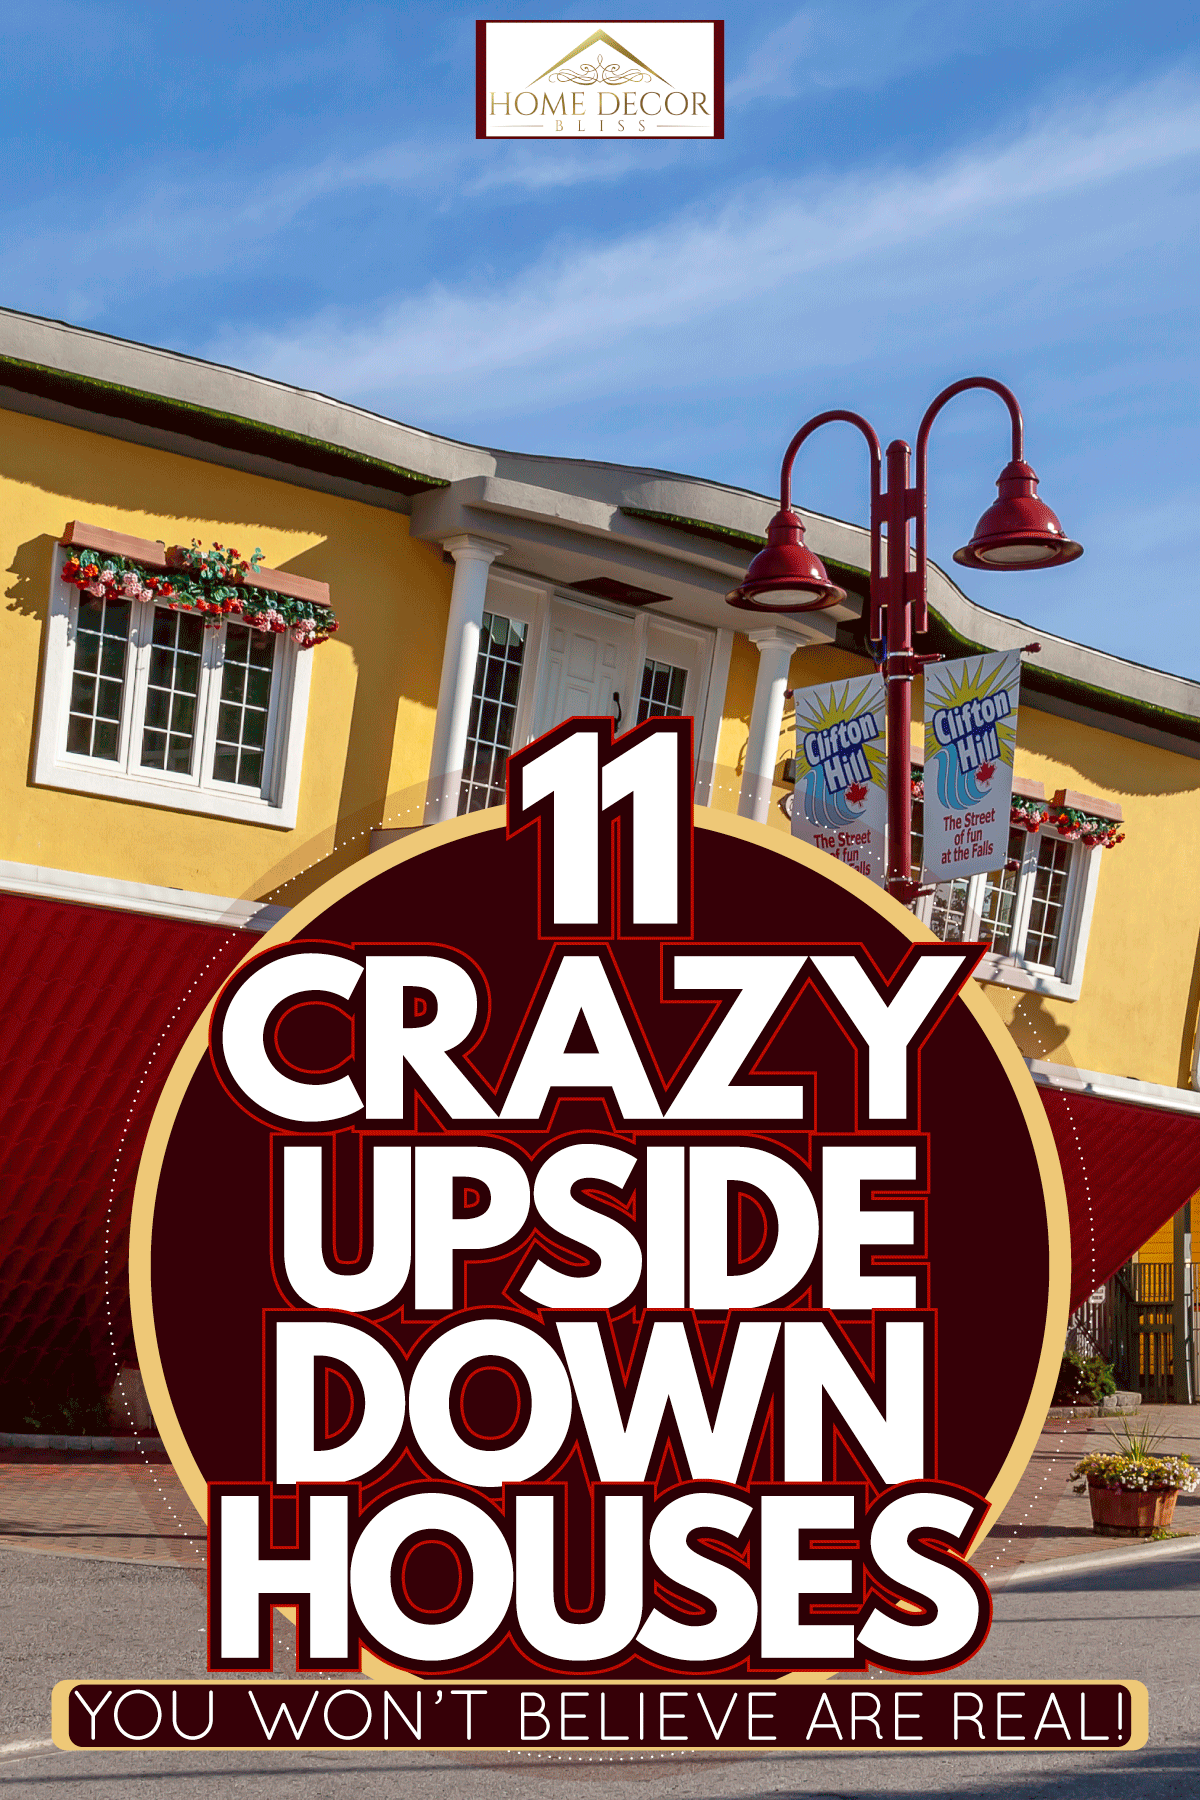 An awesome looking upside down house, 11 Crazy Upside Down Houses You Won't Believe Are Real!